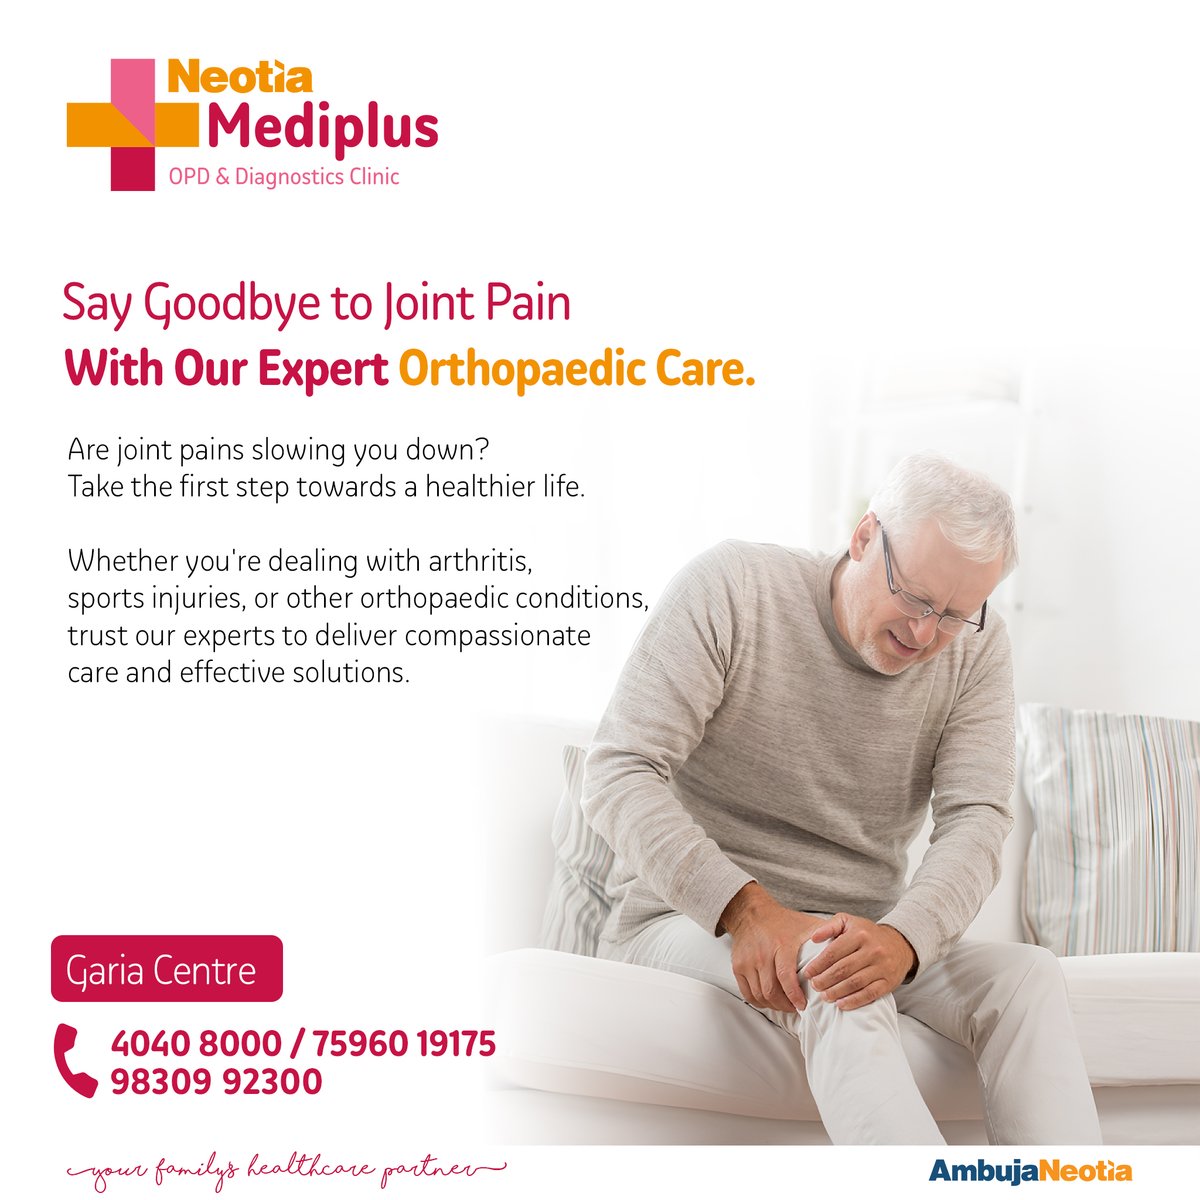 Joint pain slowing you down? Over 10 million Indians suffer from arthritis. Don't ignore the signs – swelling, stiffness, persistent pain.Our specialists at Neotia Mediplus are here to help. Book your appointment today! #OrthopaedicCare #JointHealth #NeotiaMediplus  #AmbujaNeotia